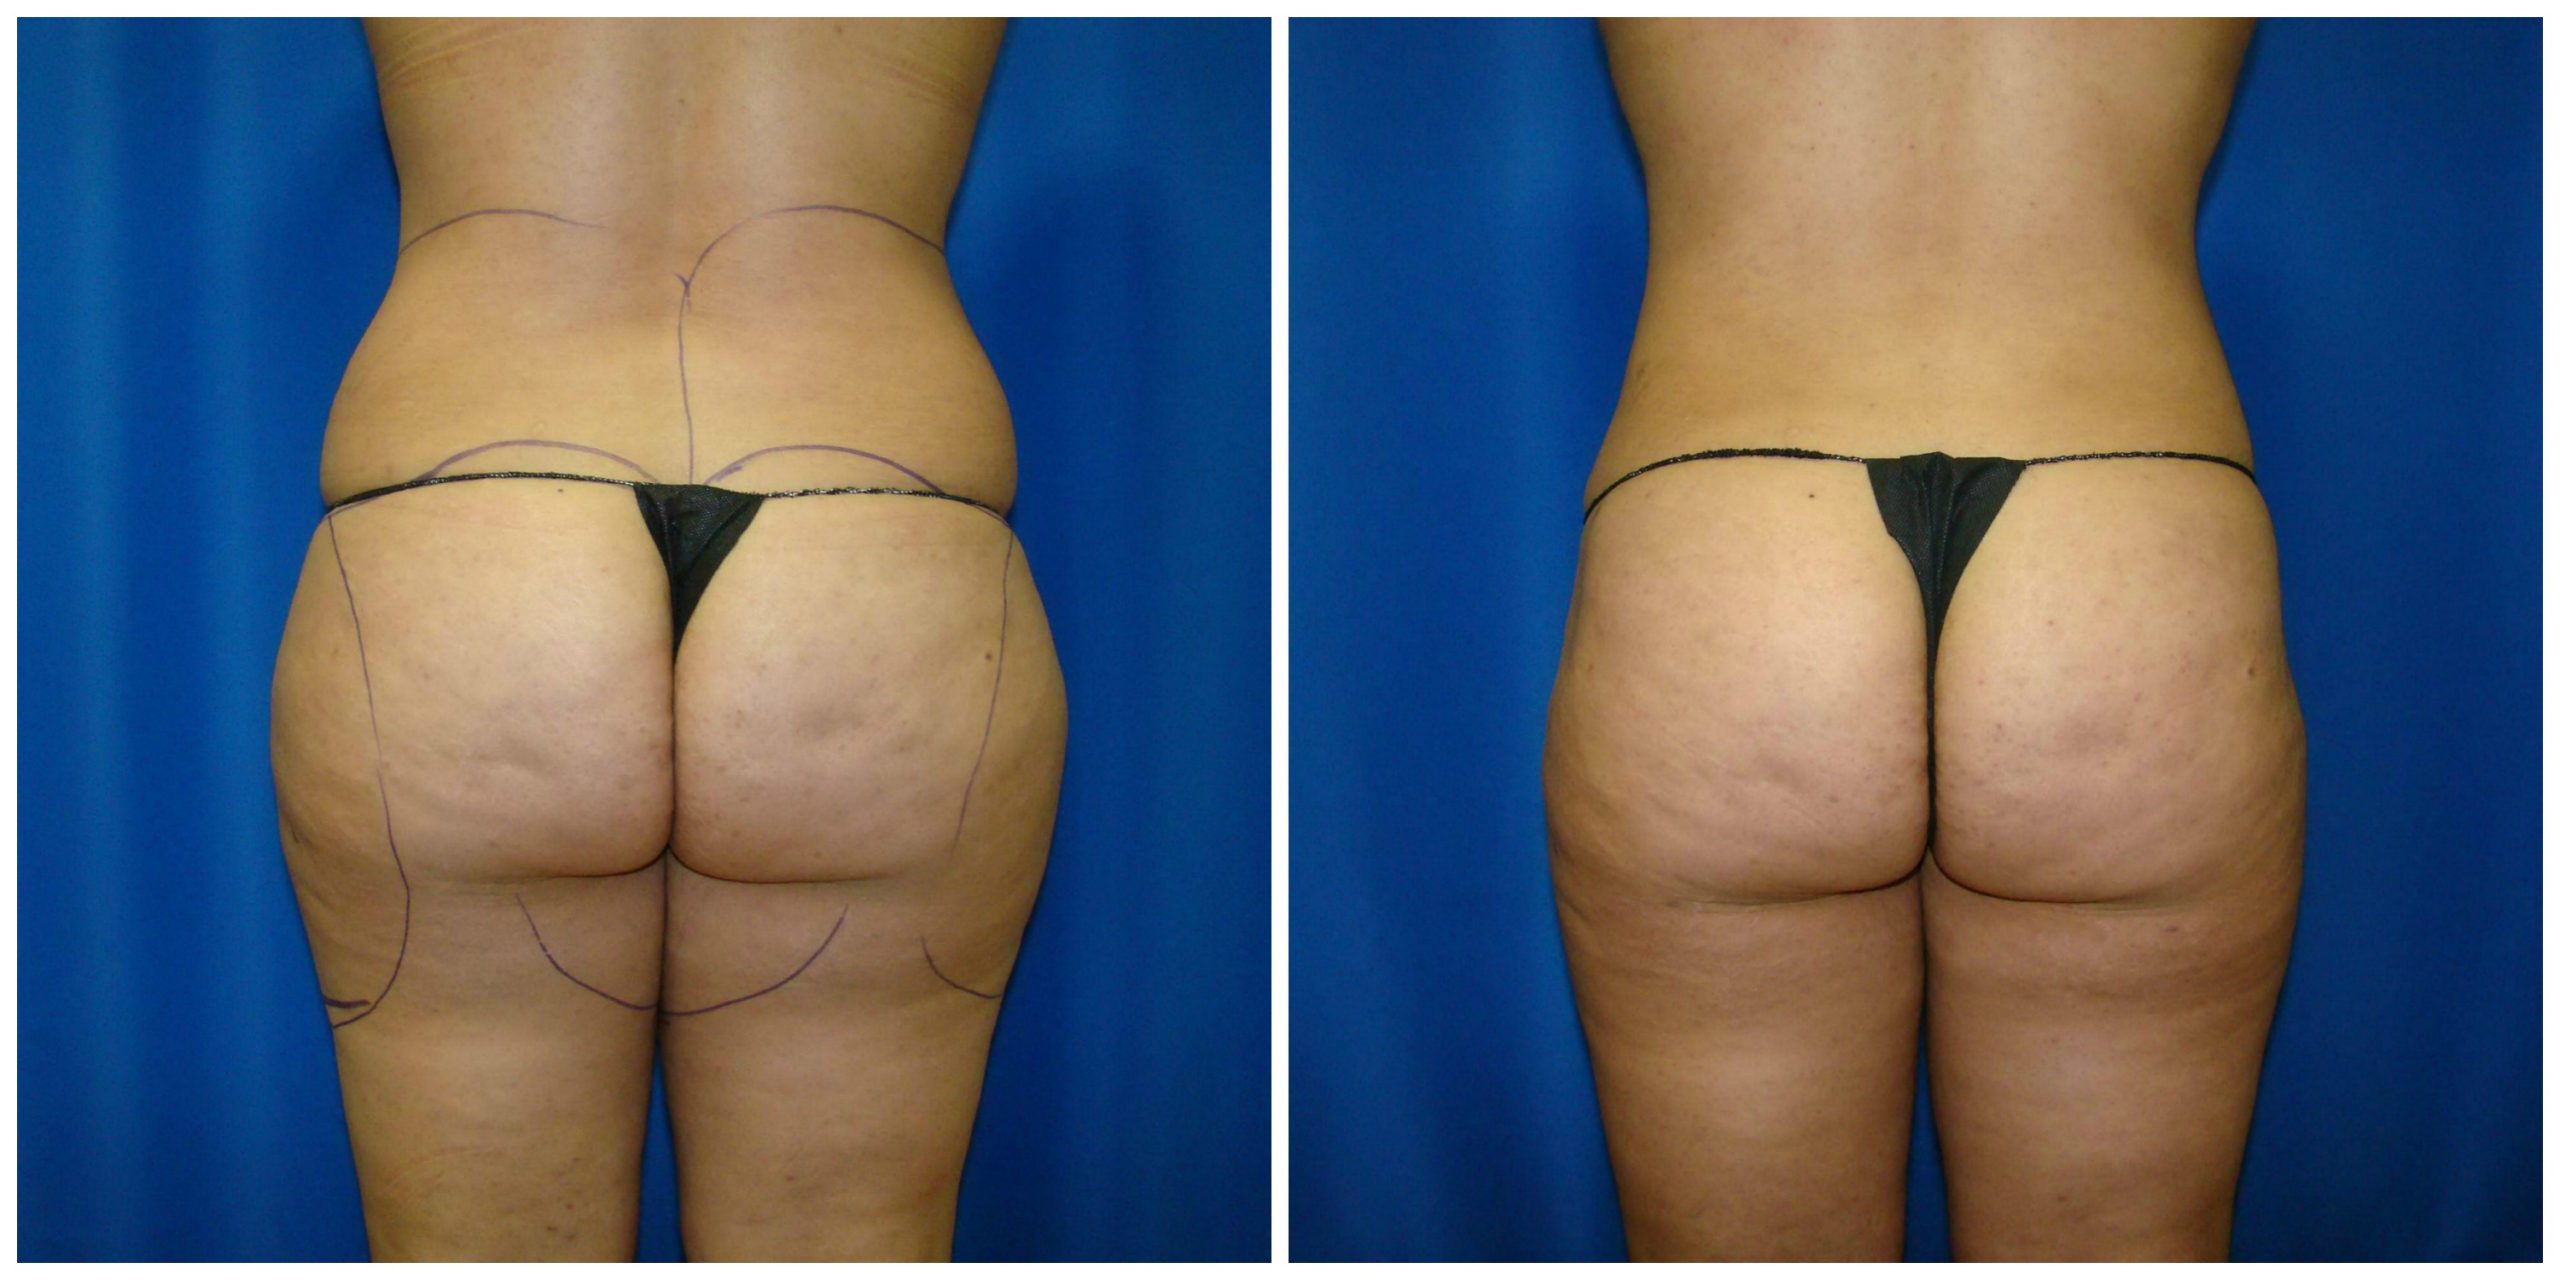 4 Tips to Recover from Liposuction